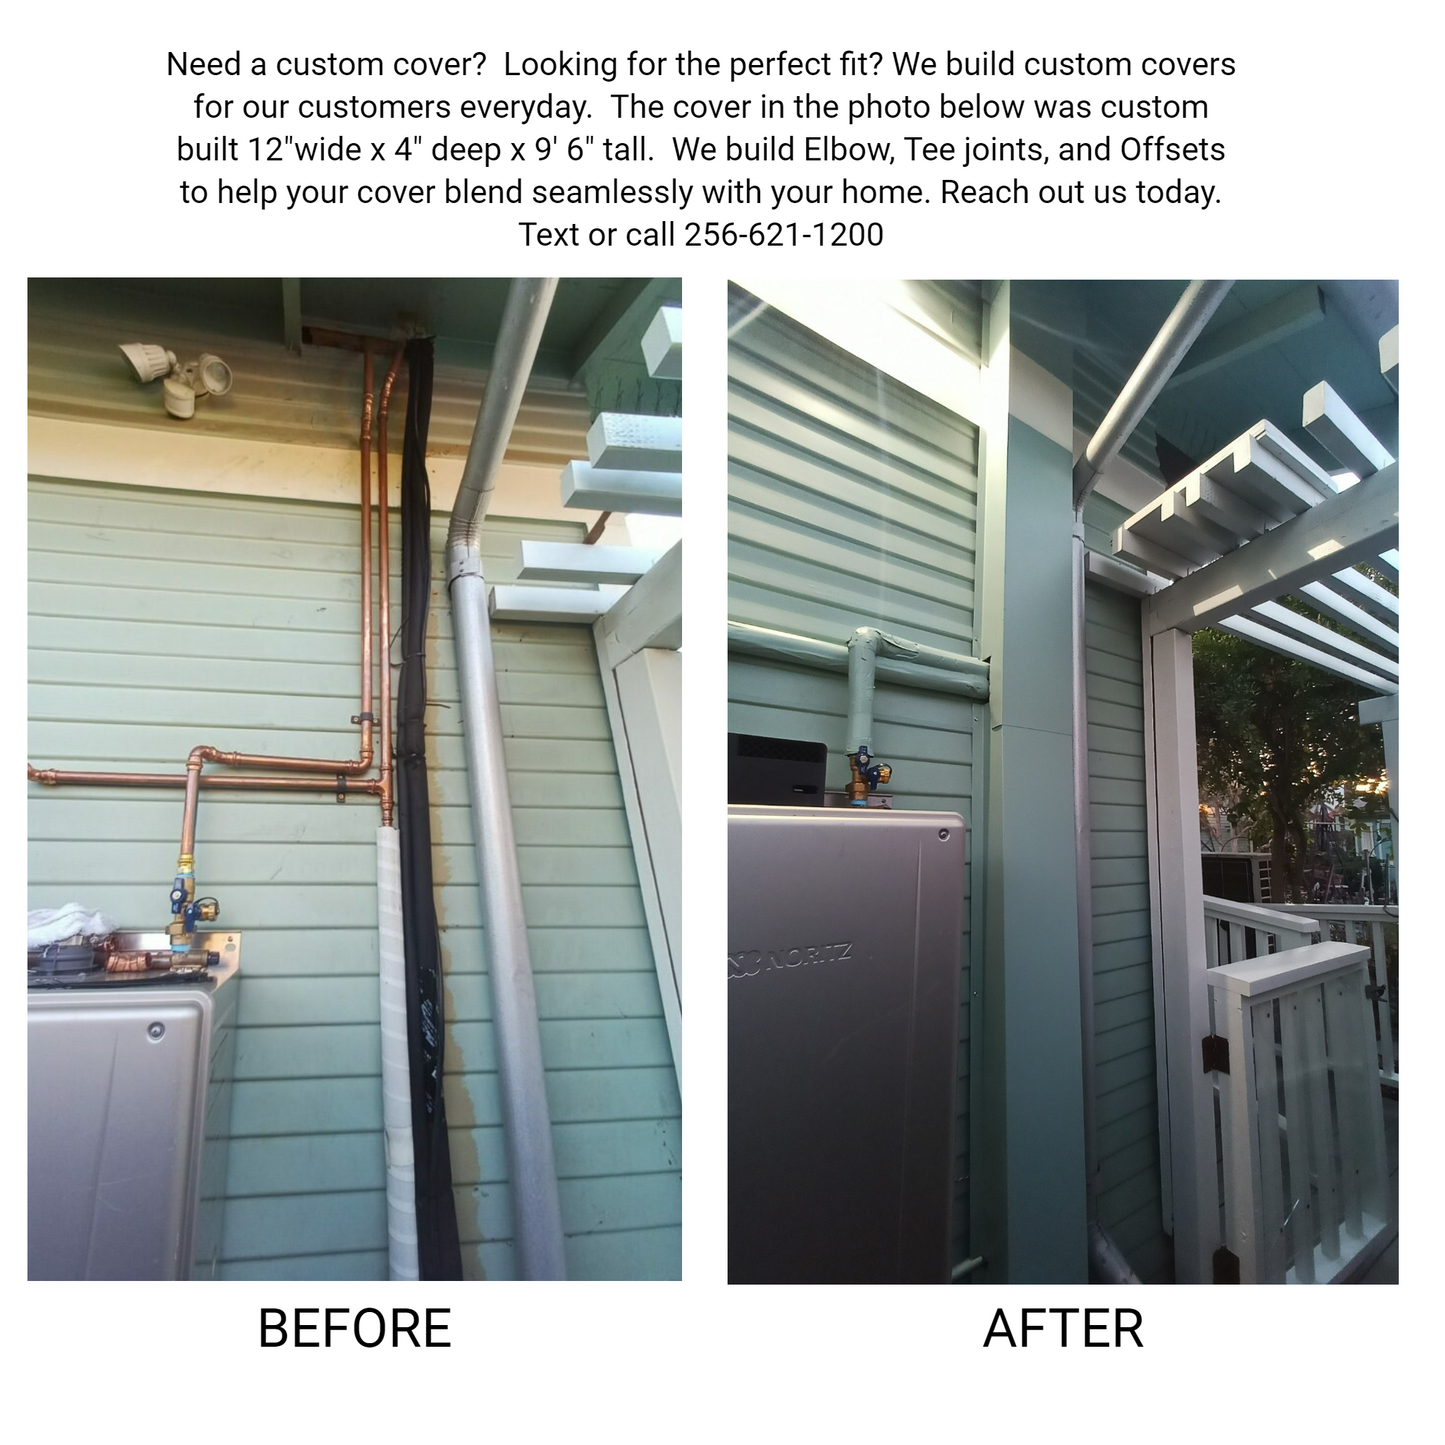 Two images showcase a house wall with custom pipe covers. The left "BEFORE" image reveals exposed HVAC lines, while the right "AFTER" image features the same area equipped with Perma Cover Commercial Series - 24 Gauge Painted Metal HVAC Line Set Covers - Heavy Duty, Multiple Sizes & Colors for a seamless look. Contact information and services are provided above.